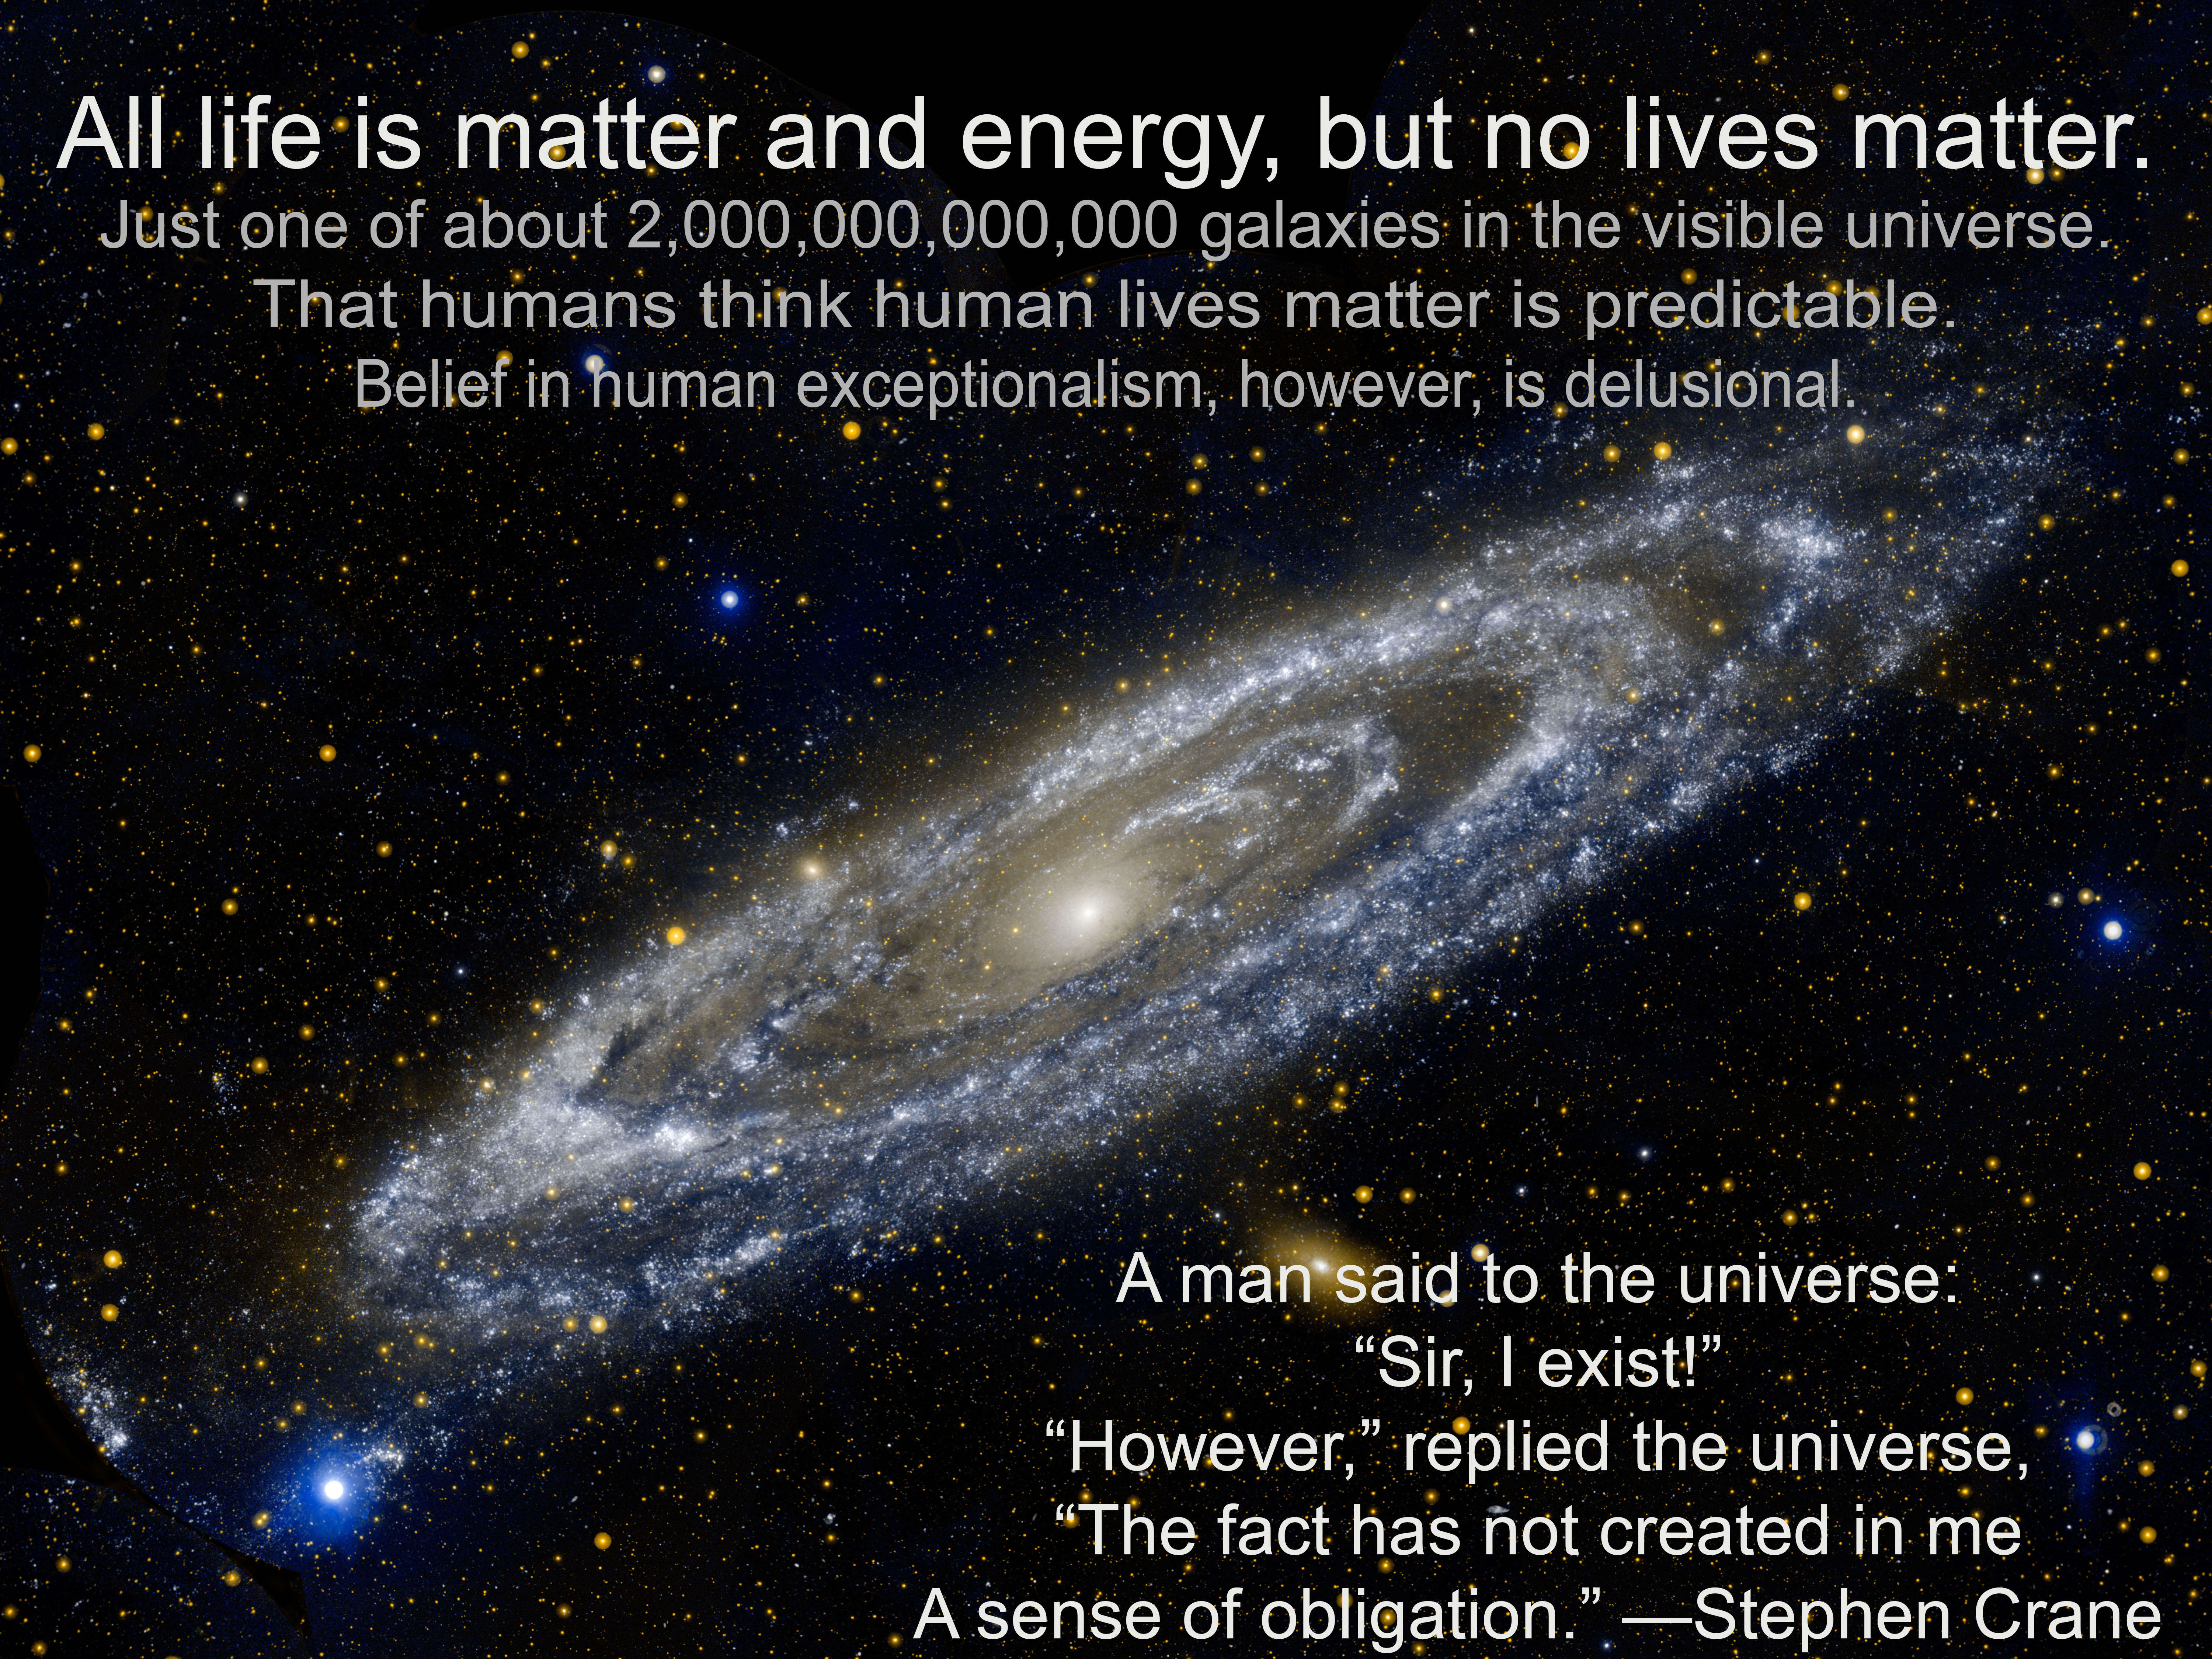 All life is matter and energy, but no lives matter. Human exceptionalism is delusional